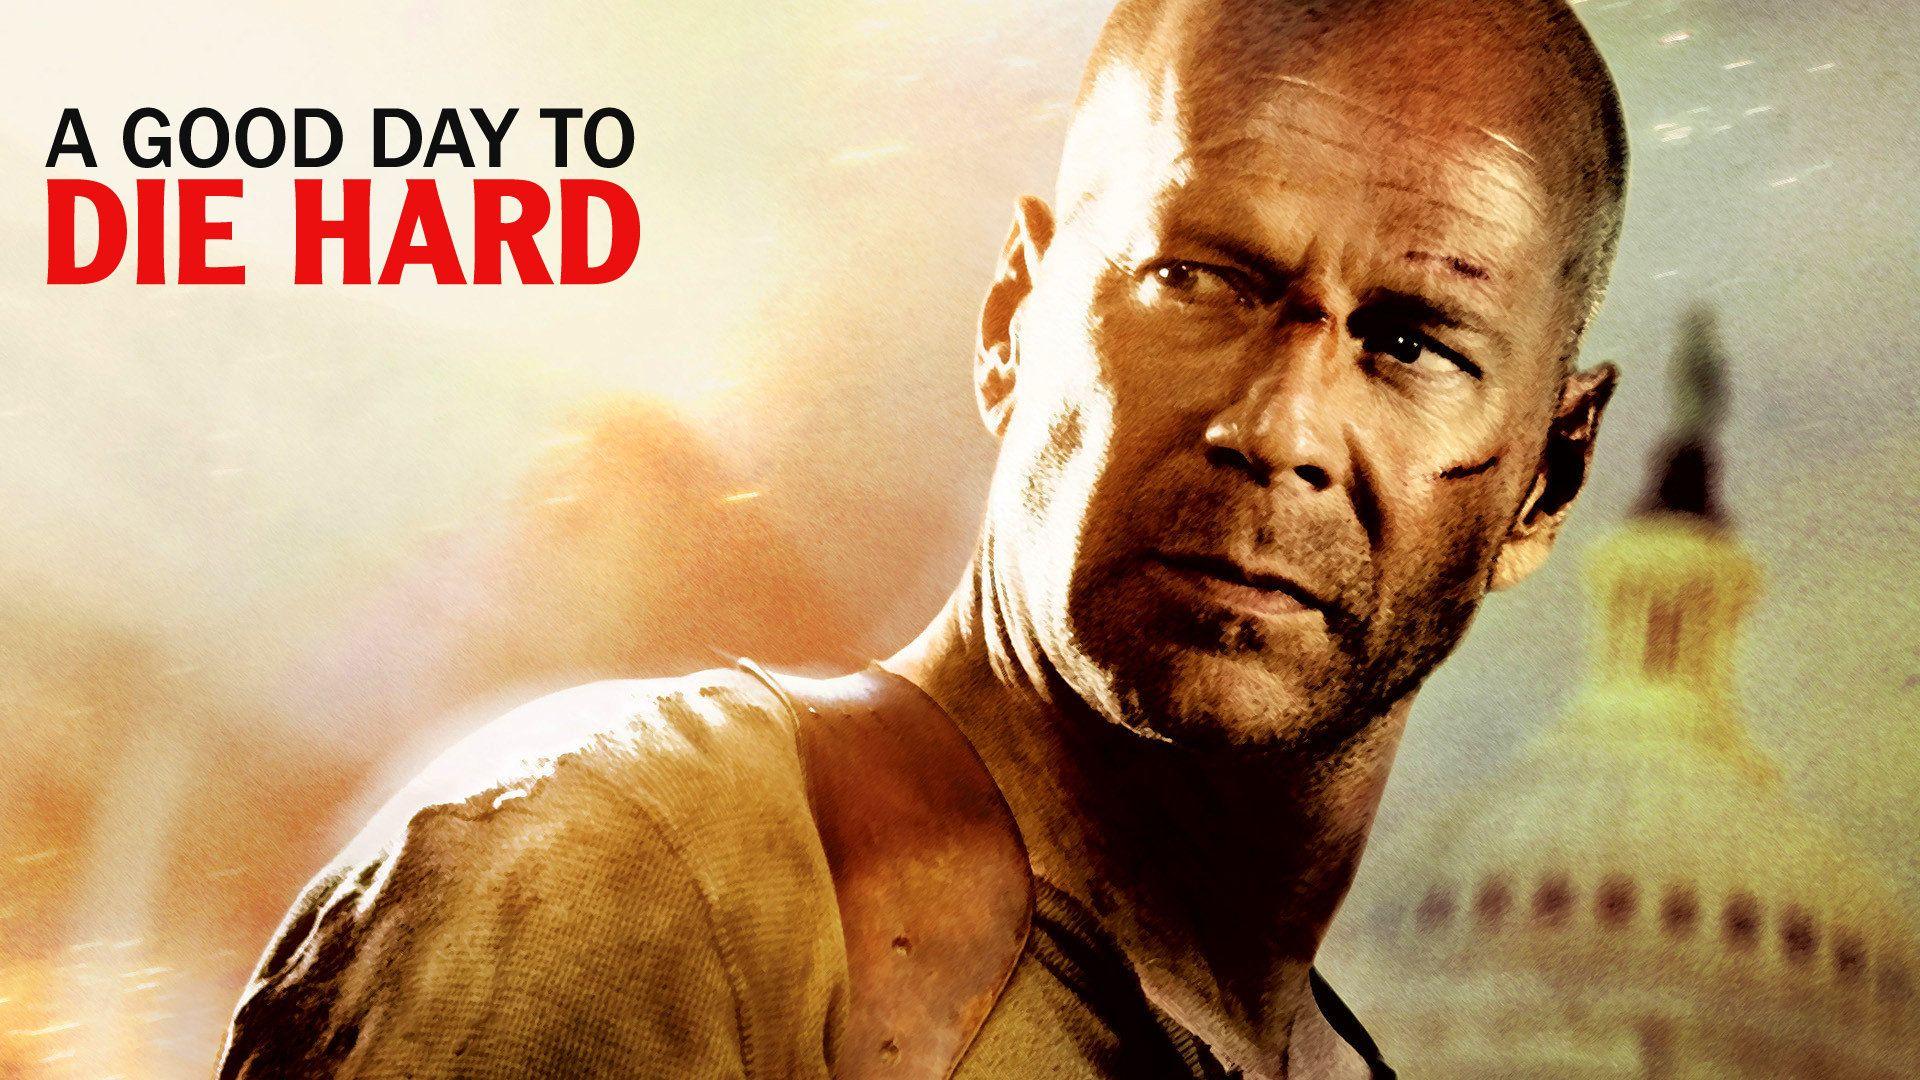 A Good Day To Die Hard Bruce Willis Wallpaper. The Discovery Blog